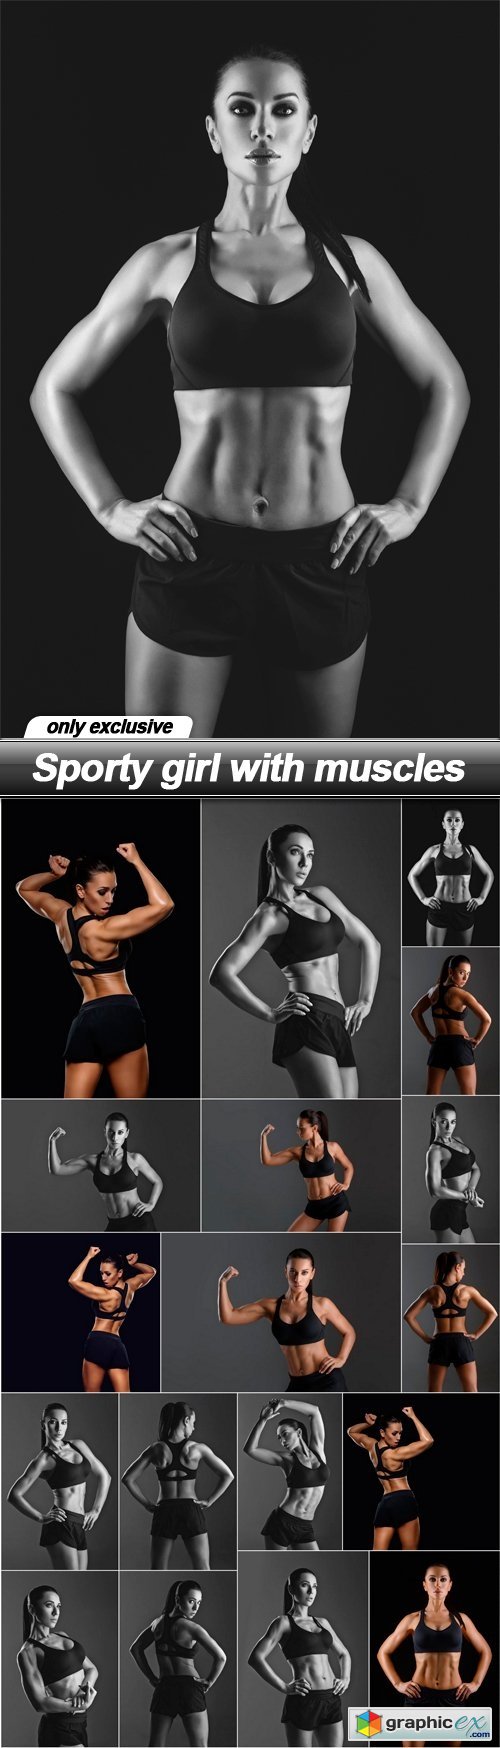 Sporty girl with muscles - 18 UHQ JPEG